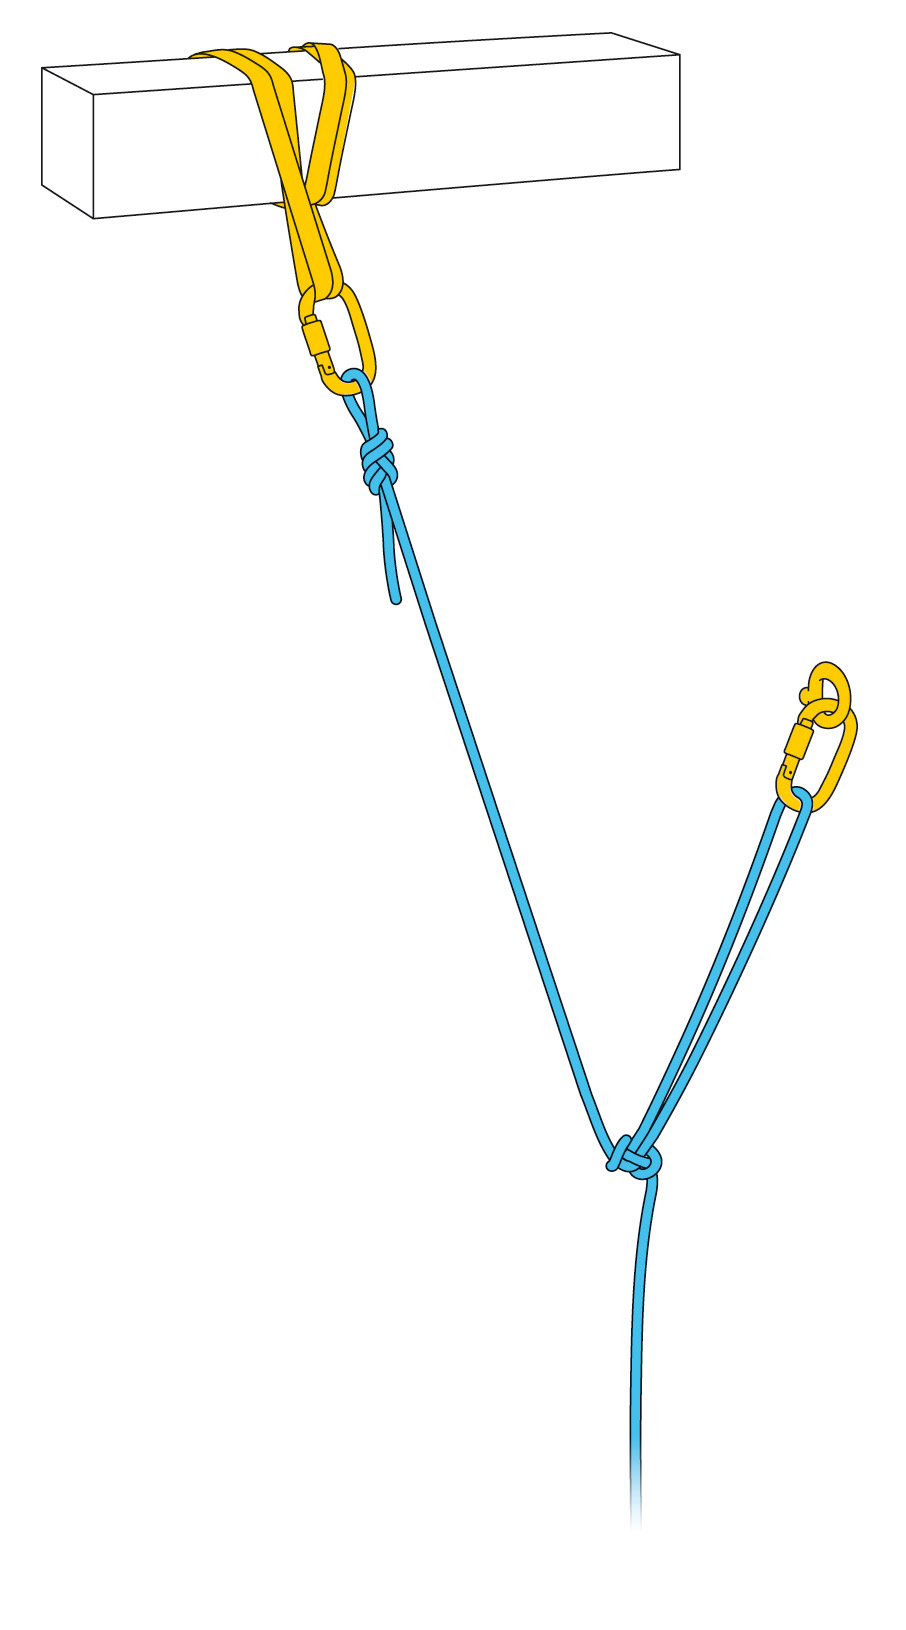 It can also be used to equalize two widely separated anchors in conjunction with a figure 8 knot.